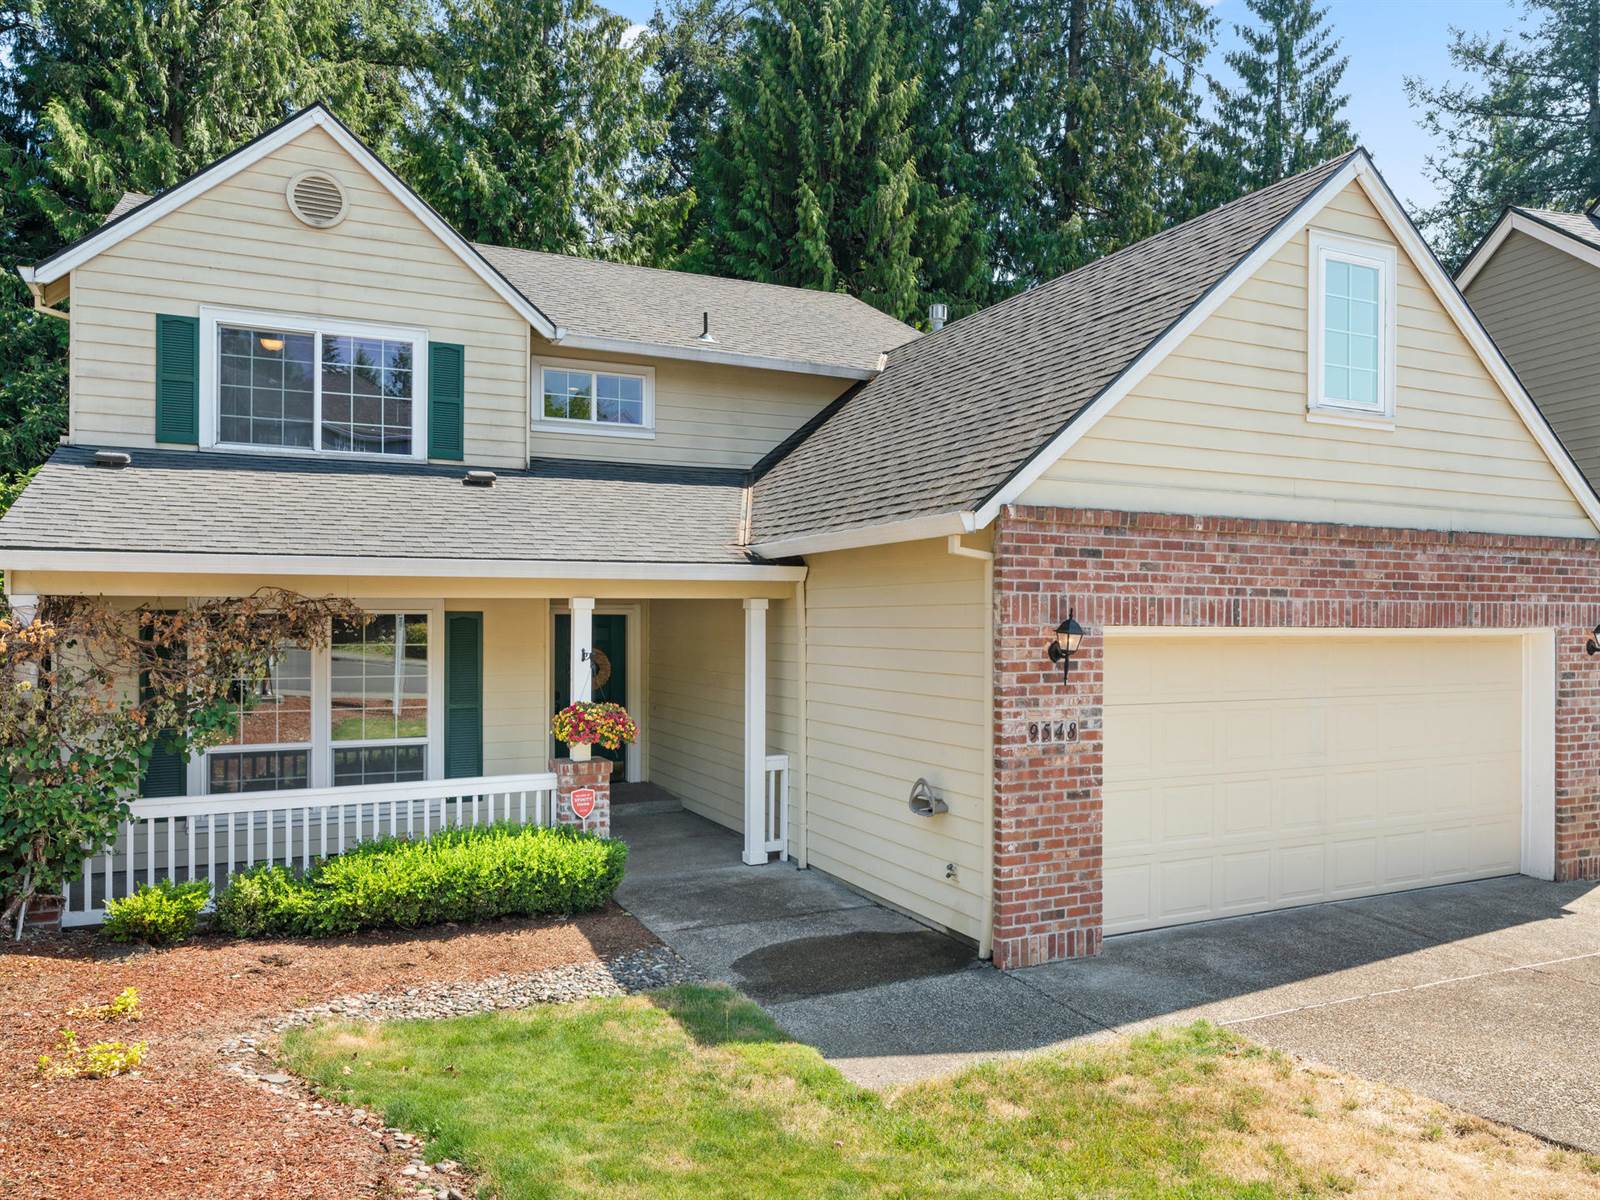 9548 NW Arborview Dr., Portland, OR 97229